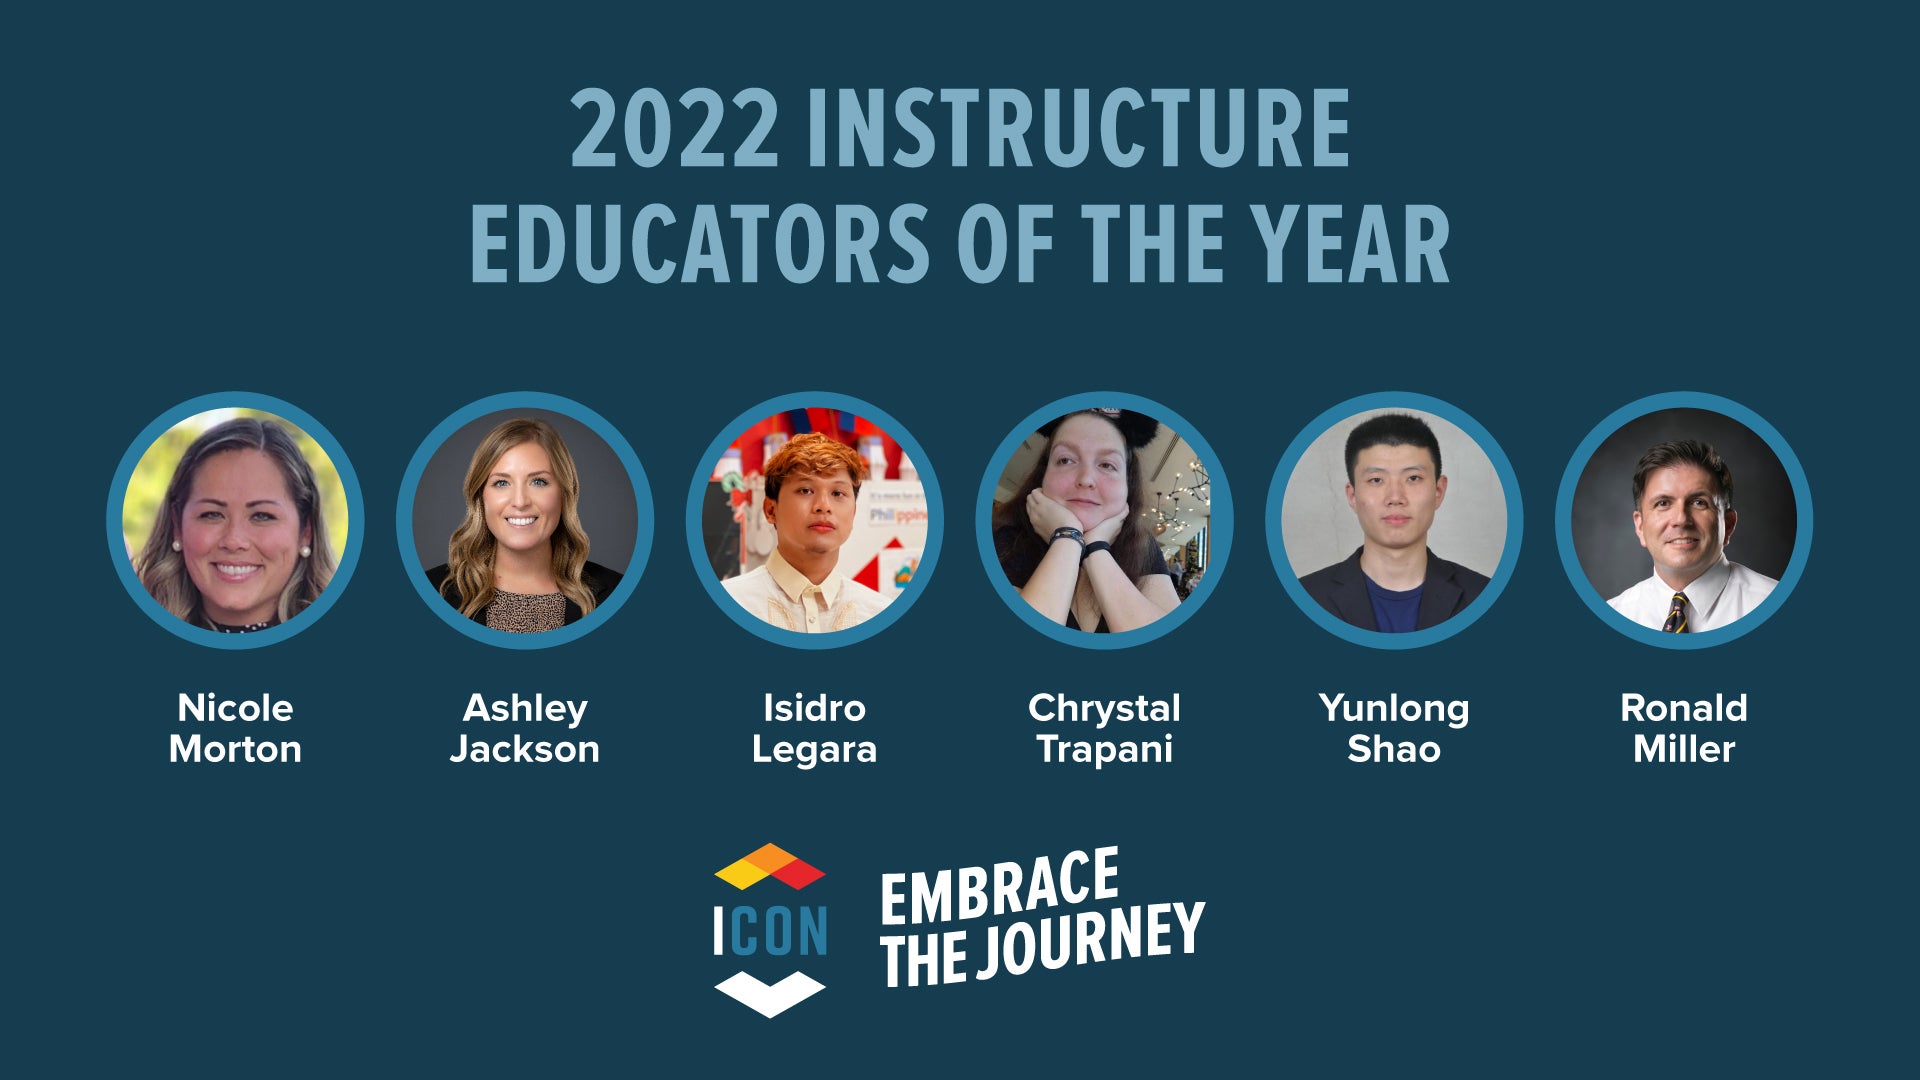 2022 Instructure Educators of The Year